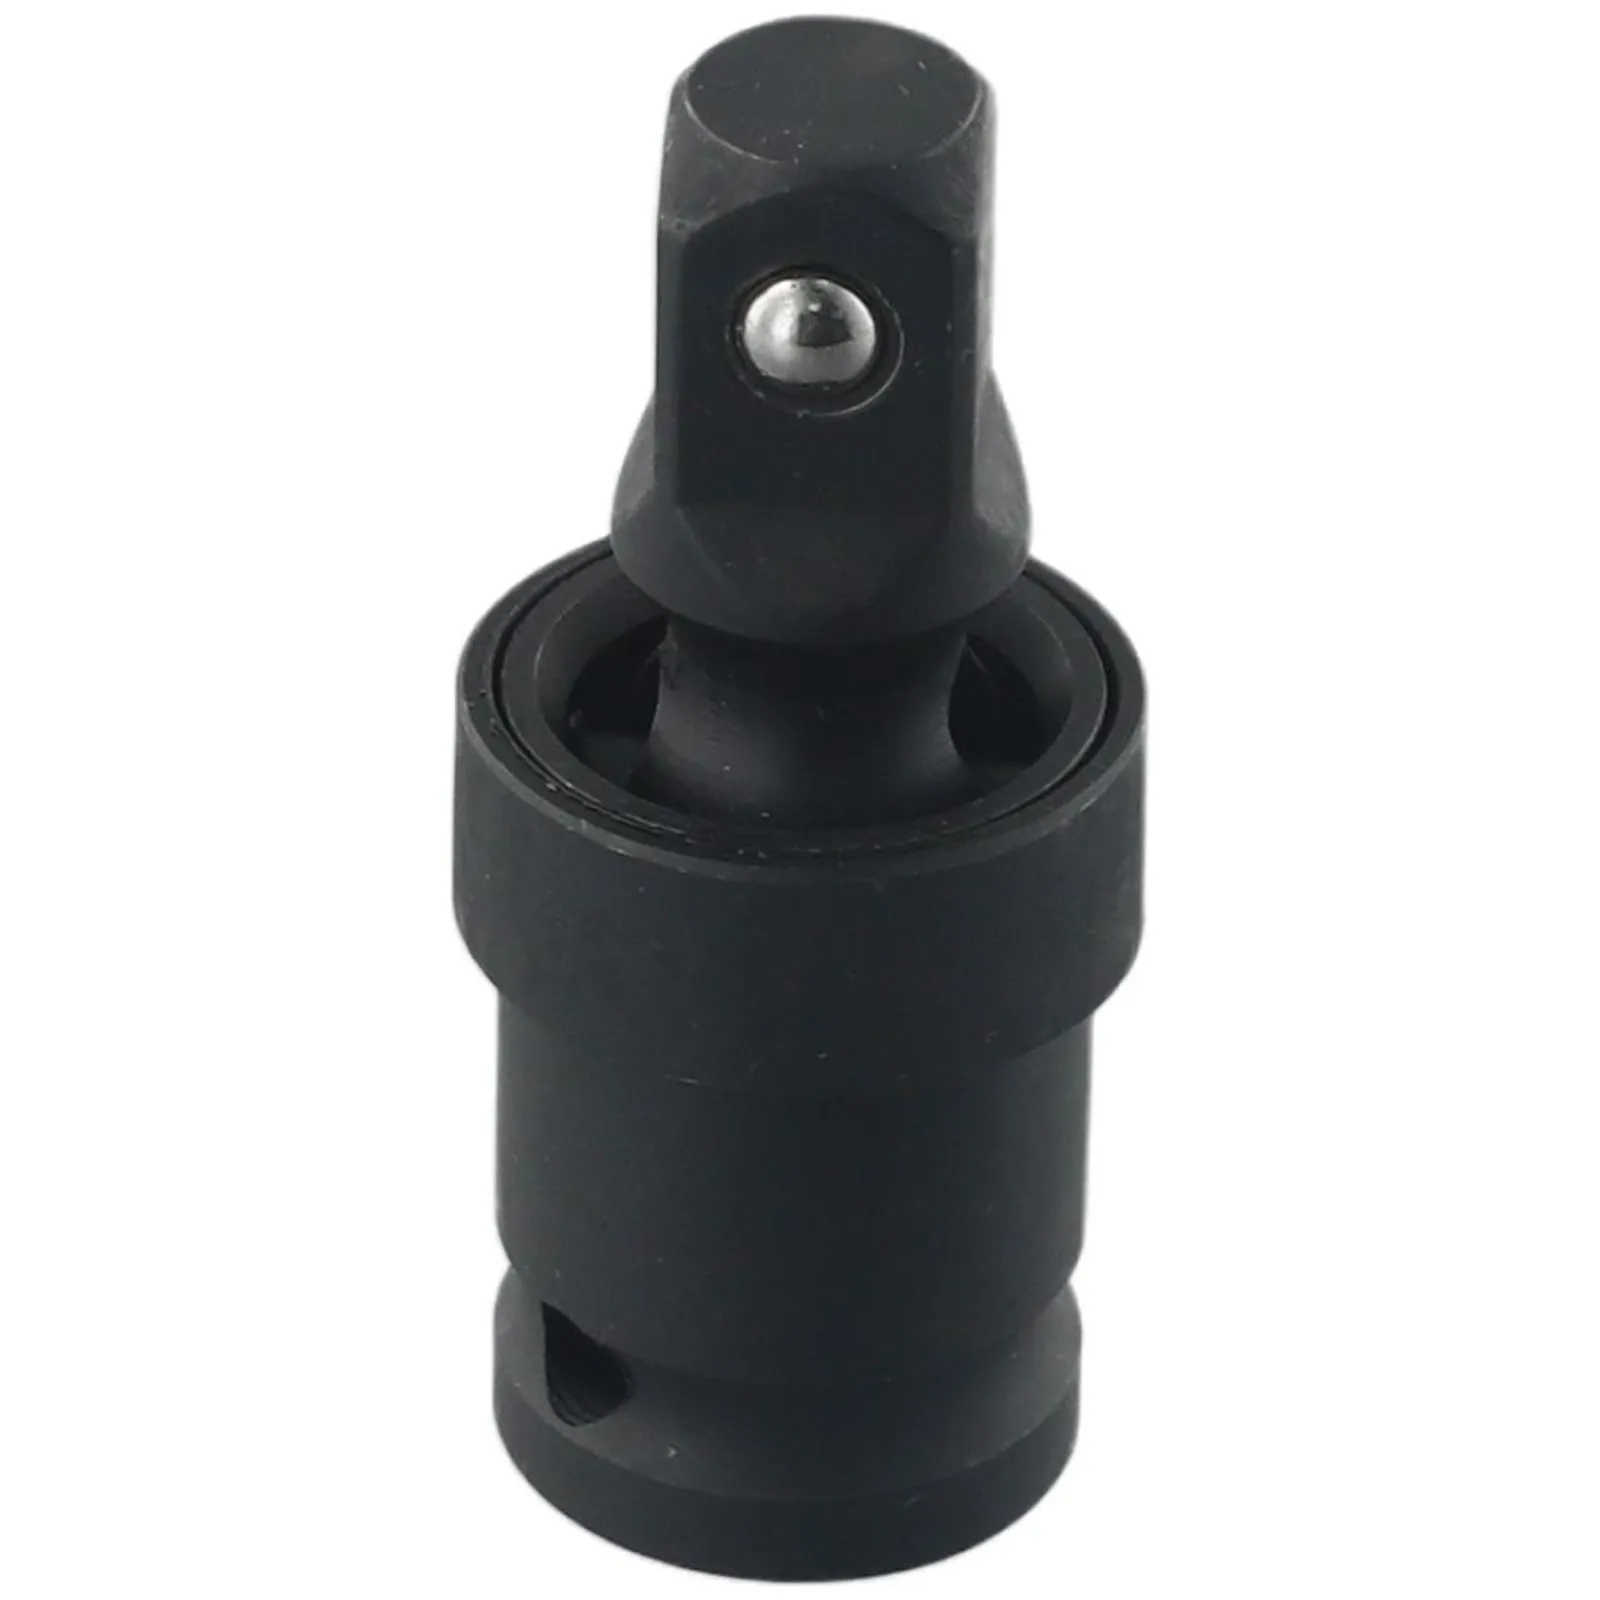 Drive Joint High Quality Black Phosphate Coated 1/2 Pneumatic Universal Joint 360 Degree Swivel Socket Adapter